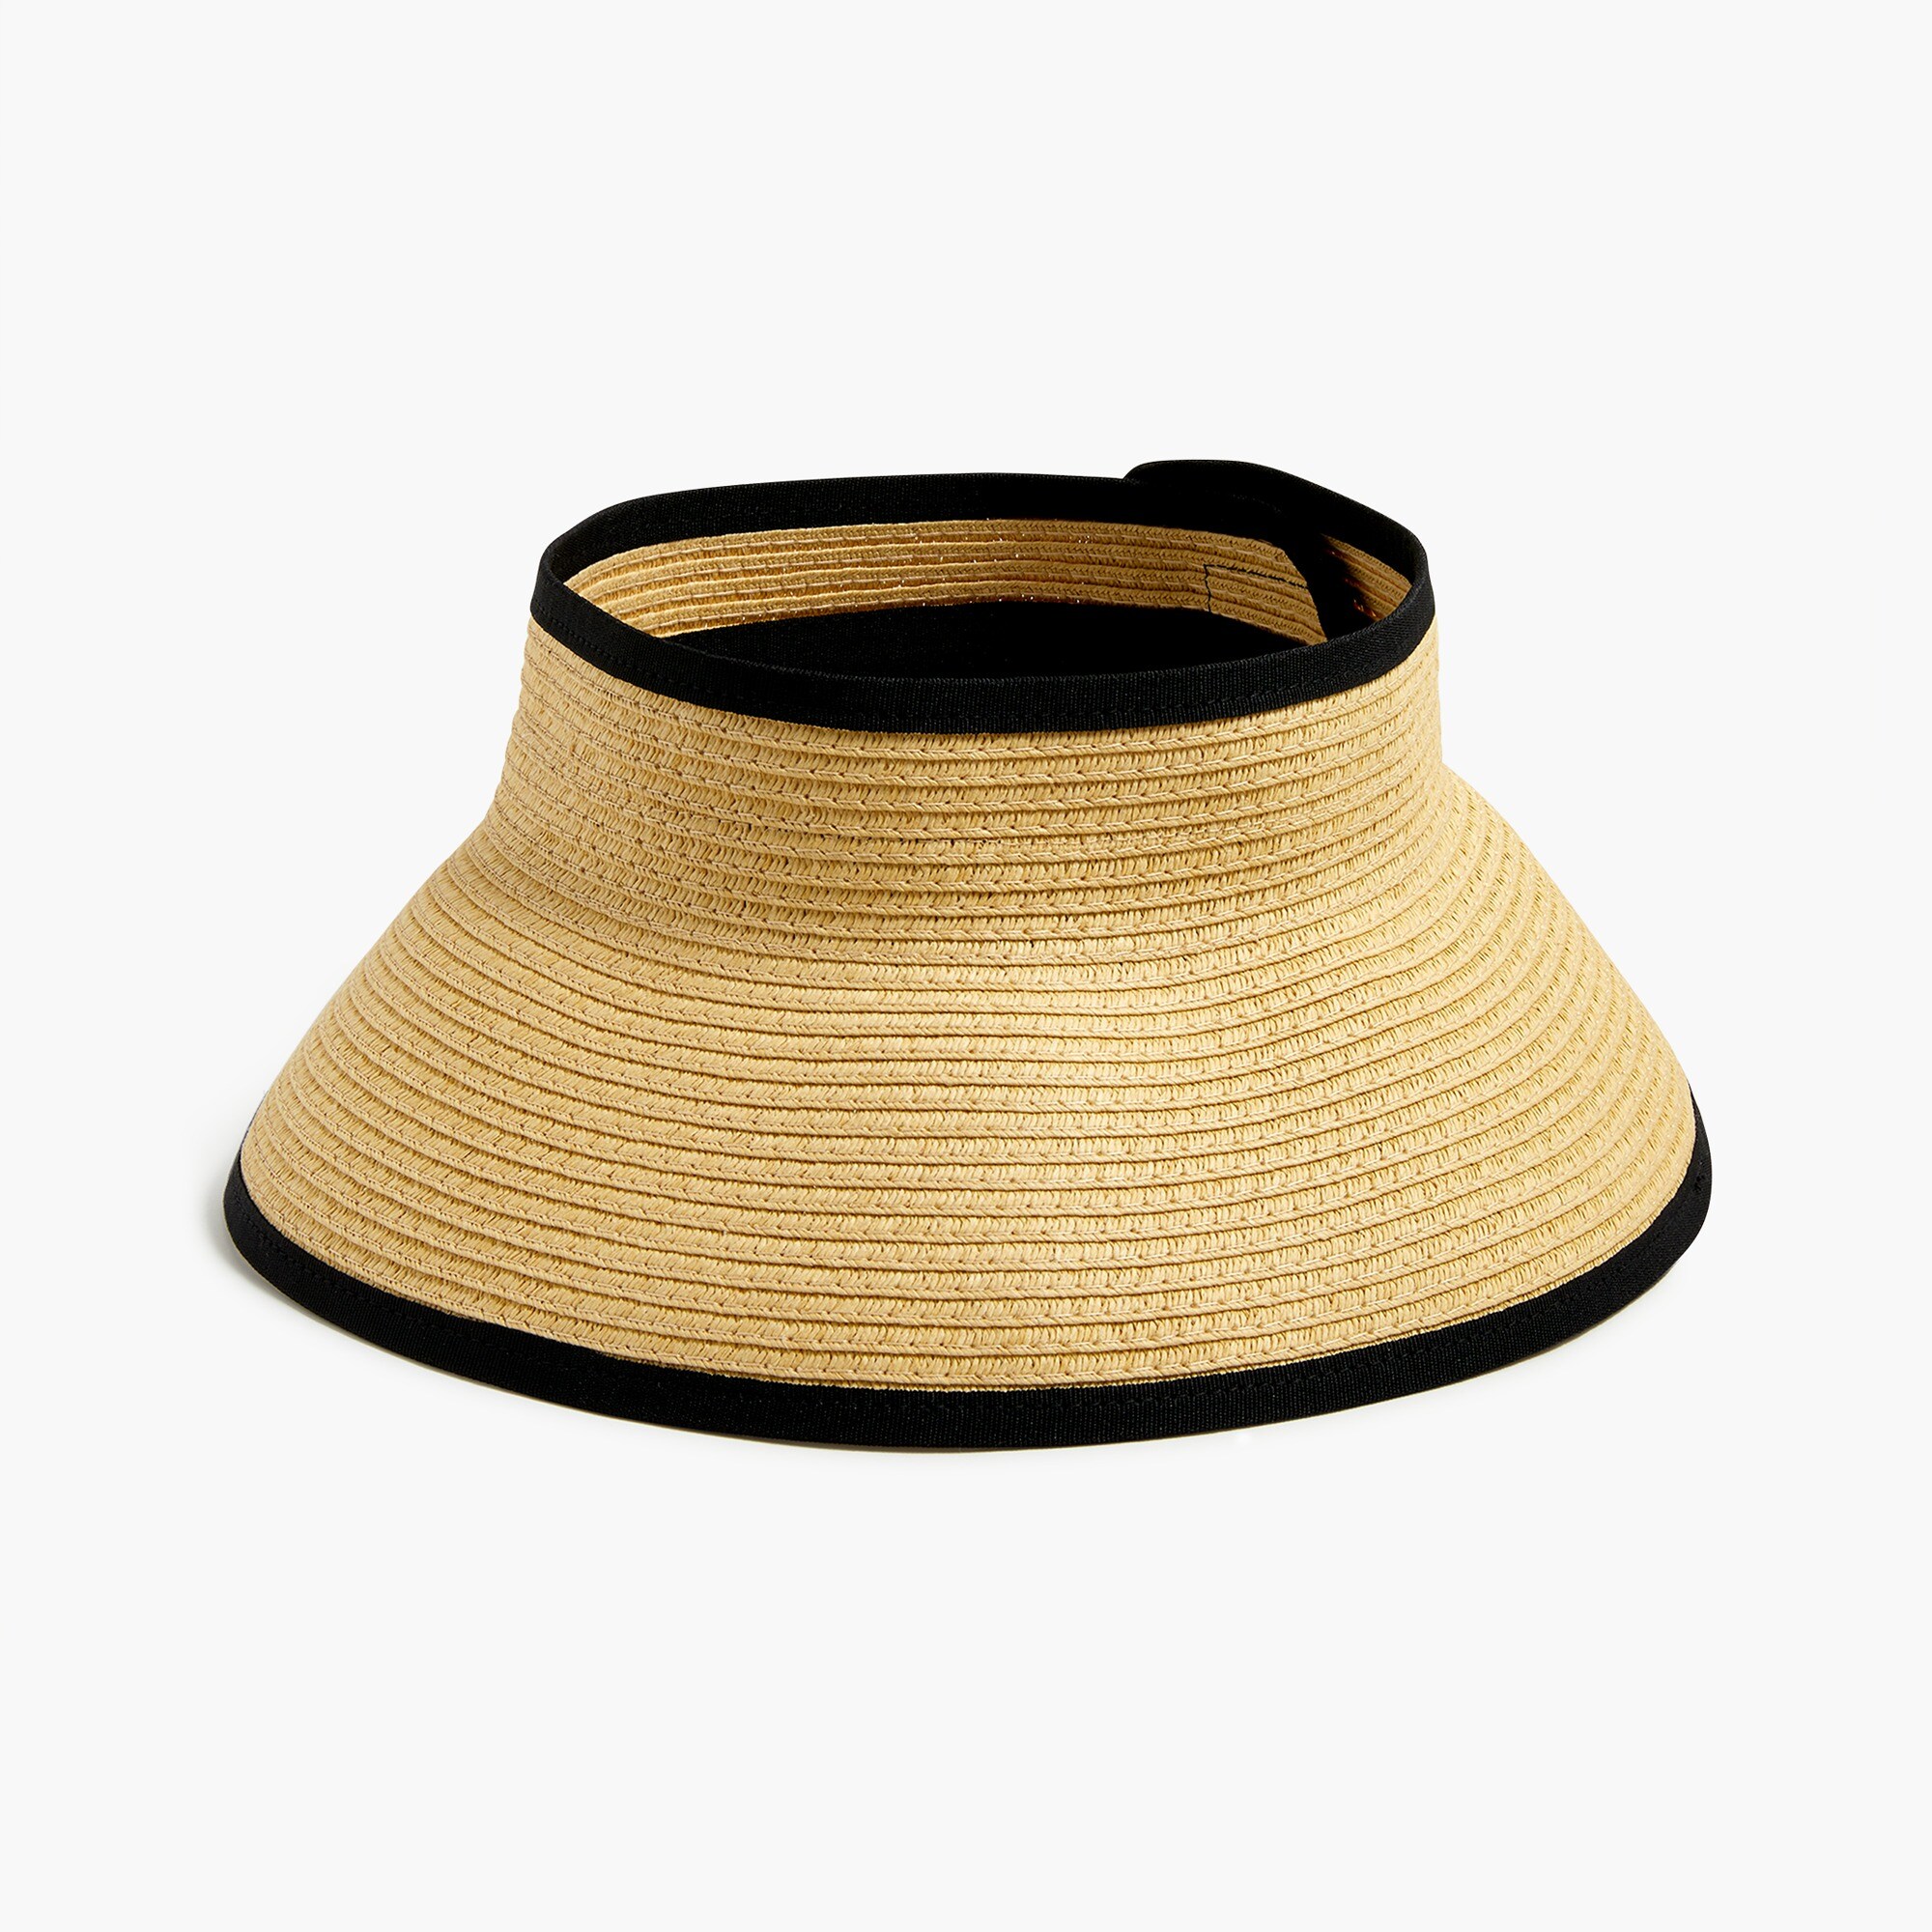 The Up-Cycled Louis Vuitton Rollable Packable Straw Visor